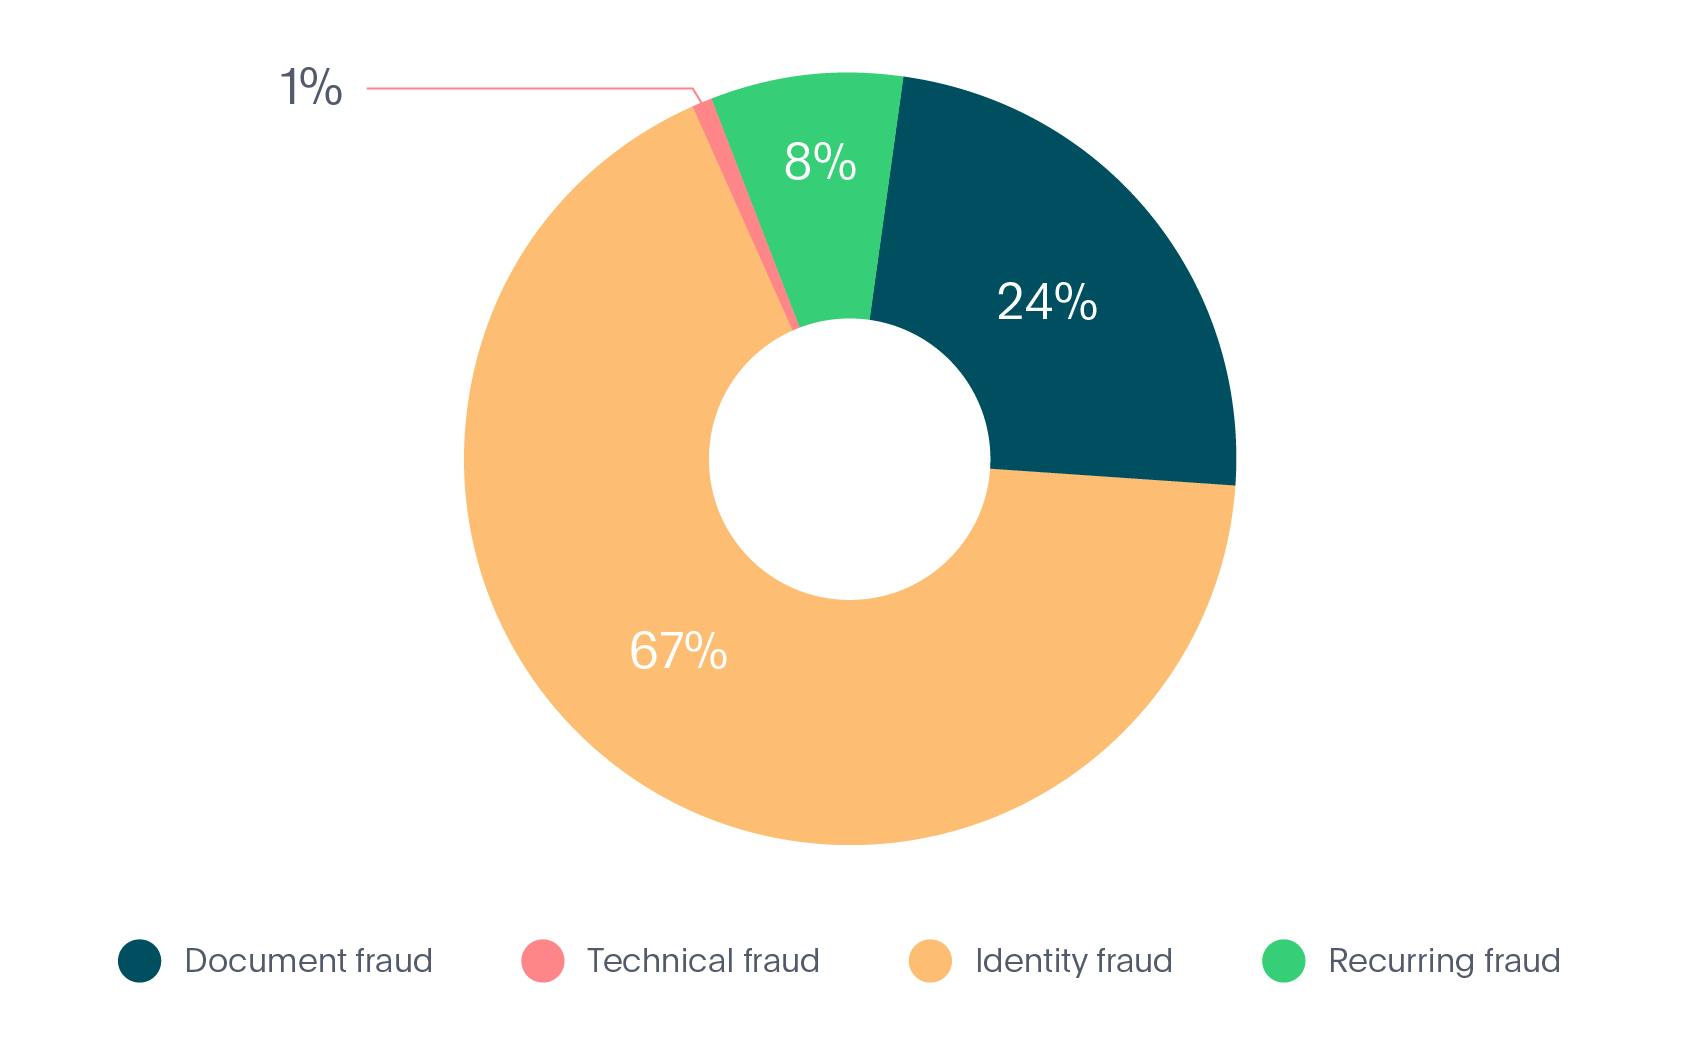 Overview of the Fintech fraud report.